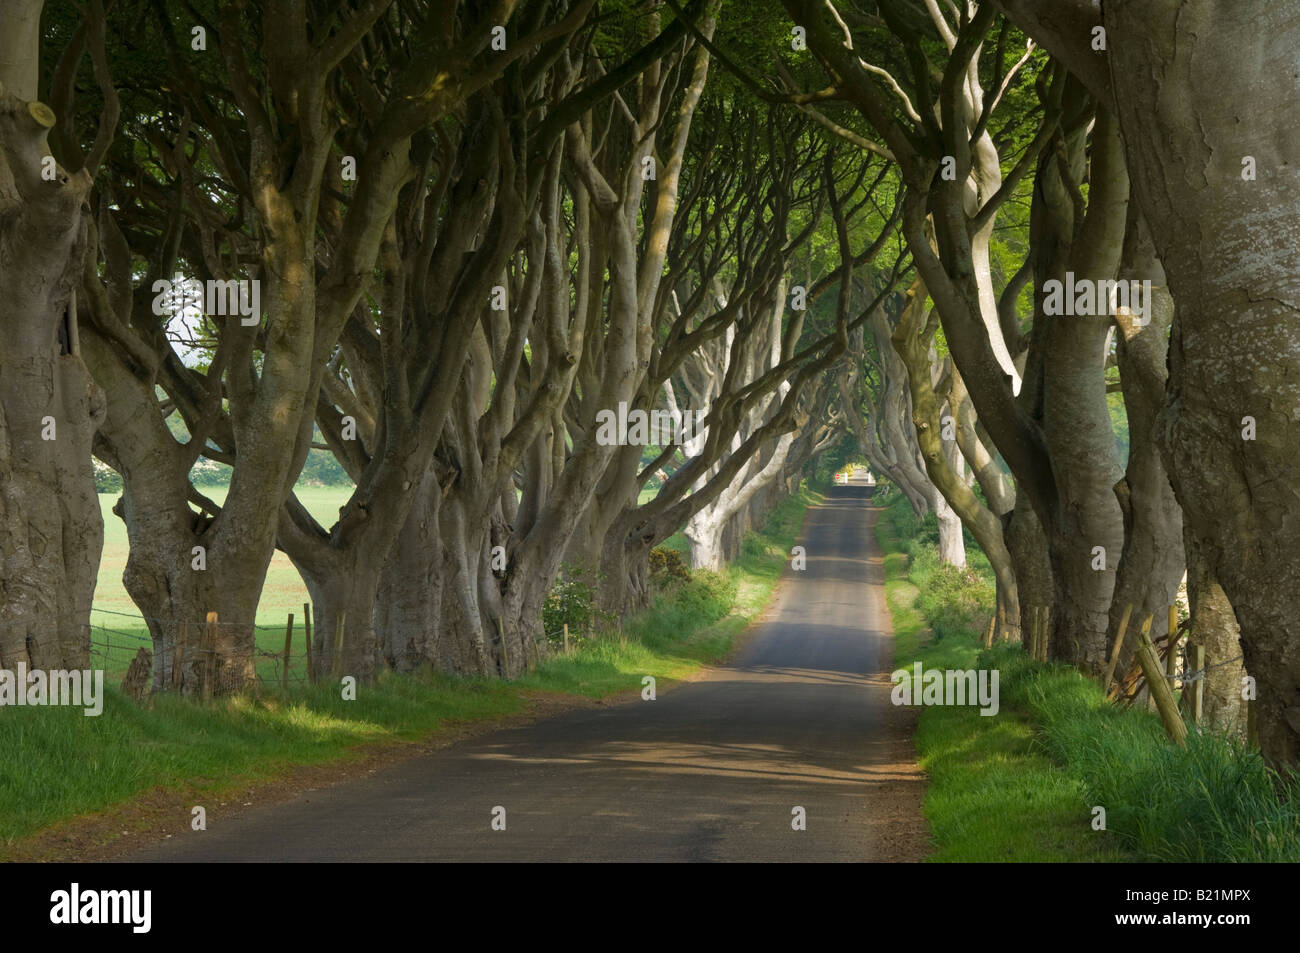 Tree lined road known as the Dark hedges near Stanocum County Antrim Northern Ireland GB UK EU Europe Stock Photo